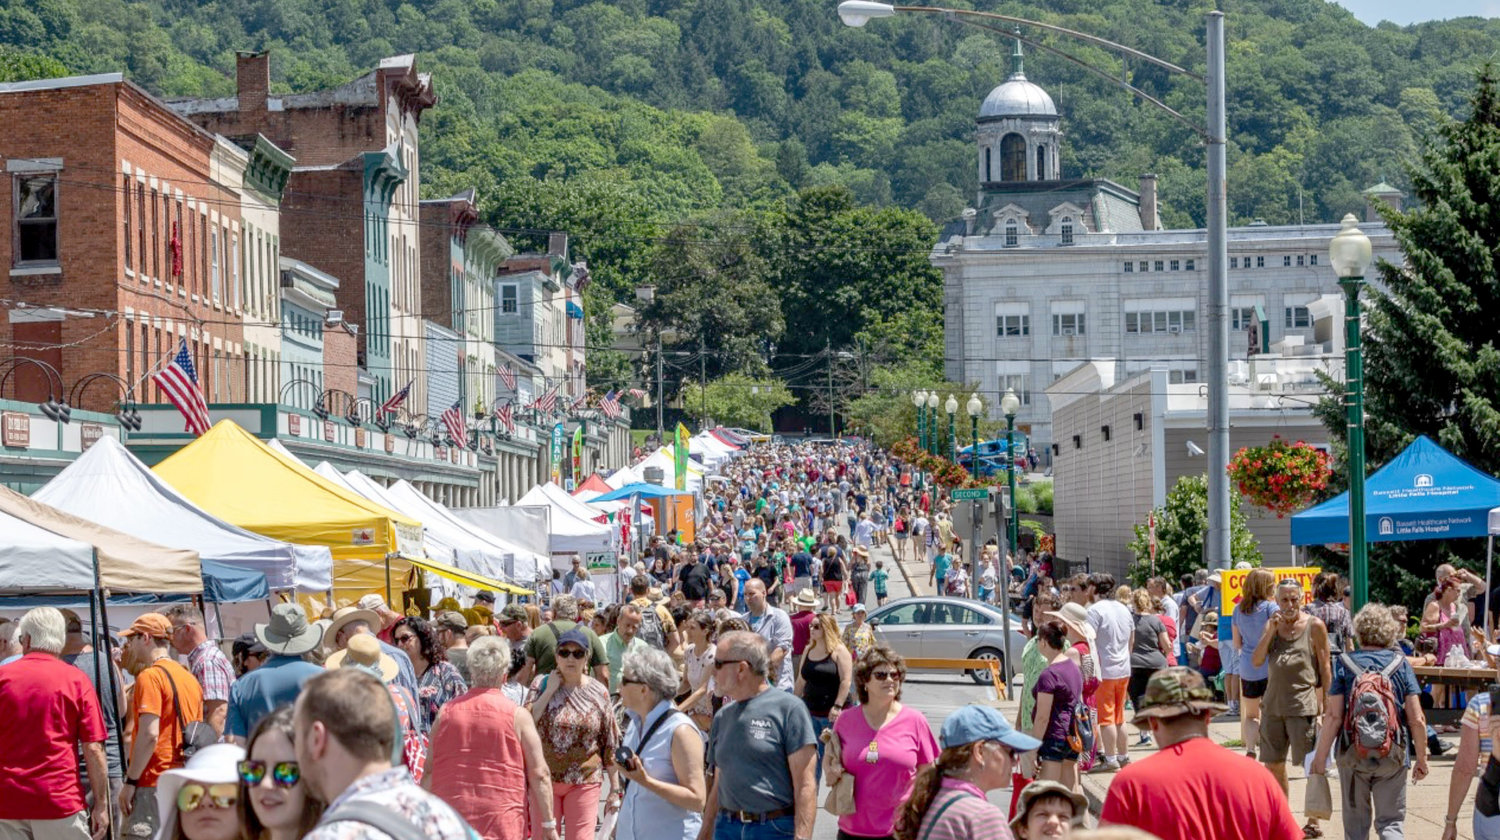 Litte Falls Downtown Revitalization Initiative — Crowds line Main Street during a previous Cheese Festival in Litte Falls in this file photo. The city’s Main Street and downtown area will get a $10 million enhancement as part of the state’s Downtown Revitalization Initiative. See story on page 4.